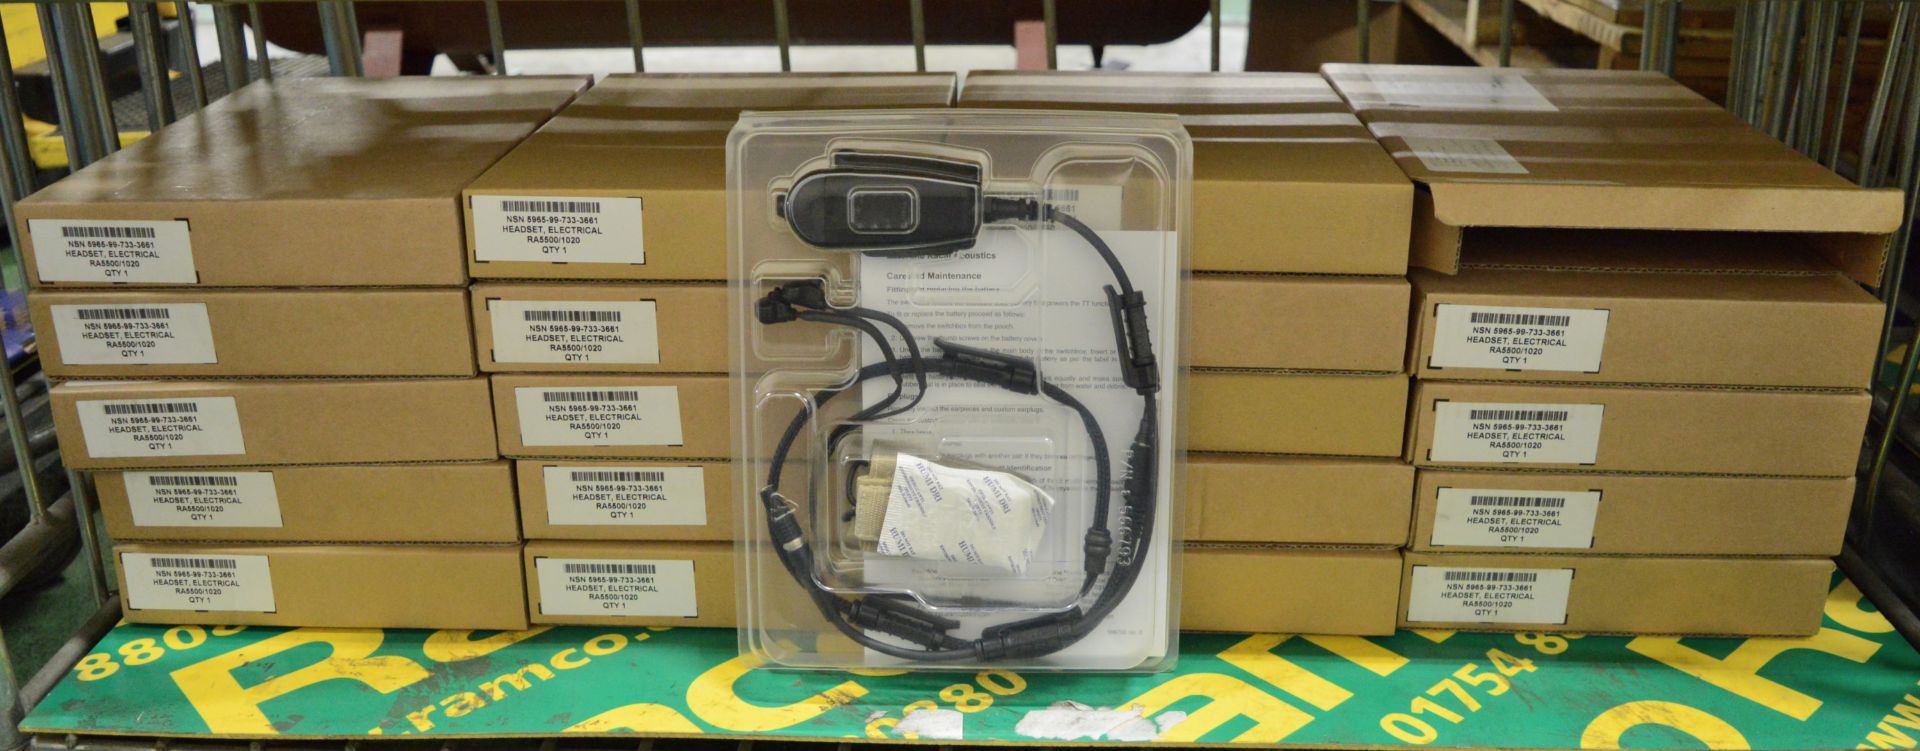 20x Racal RA5500/1020 Frontier 1000 Headsets.